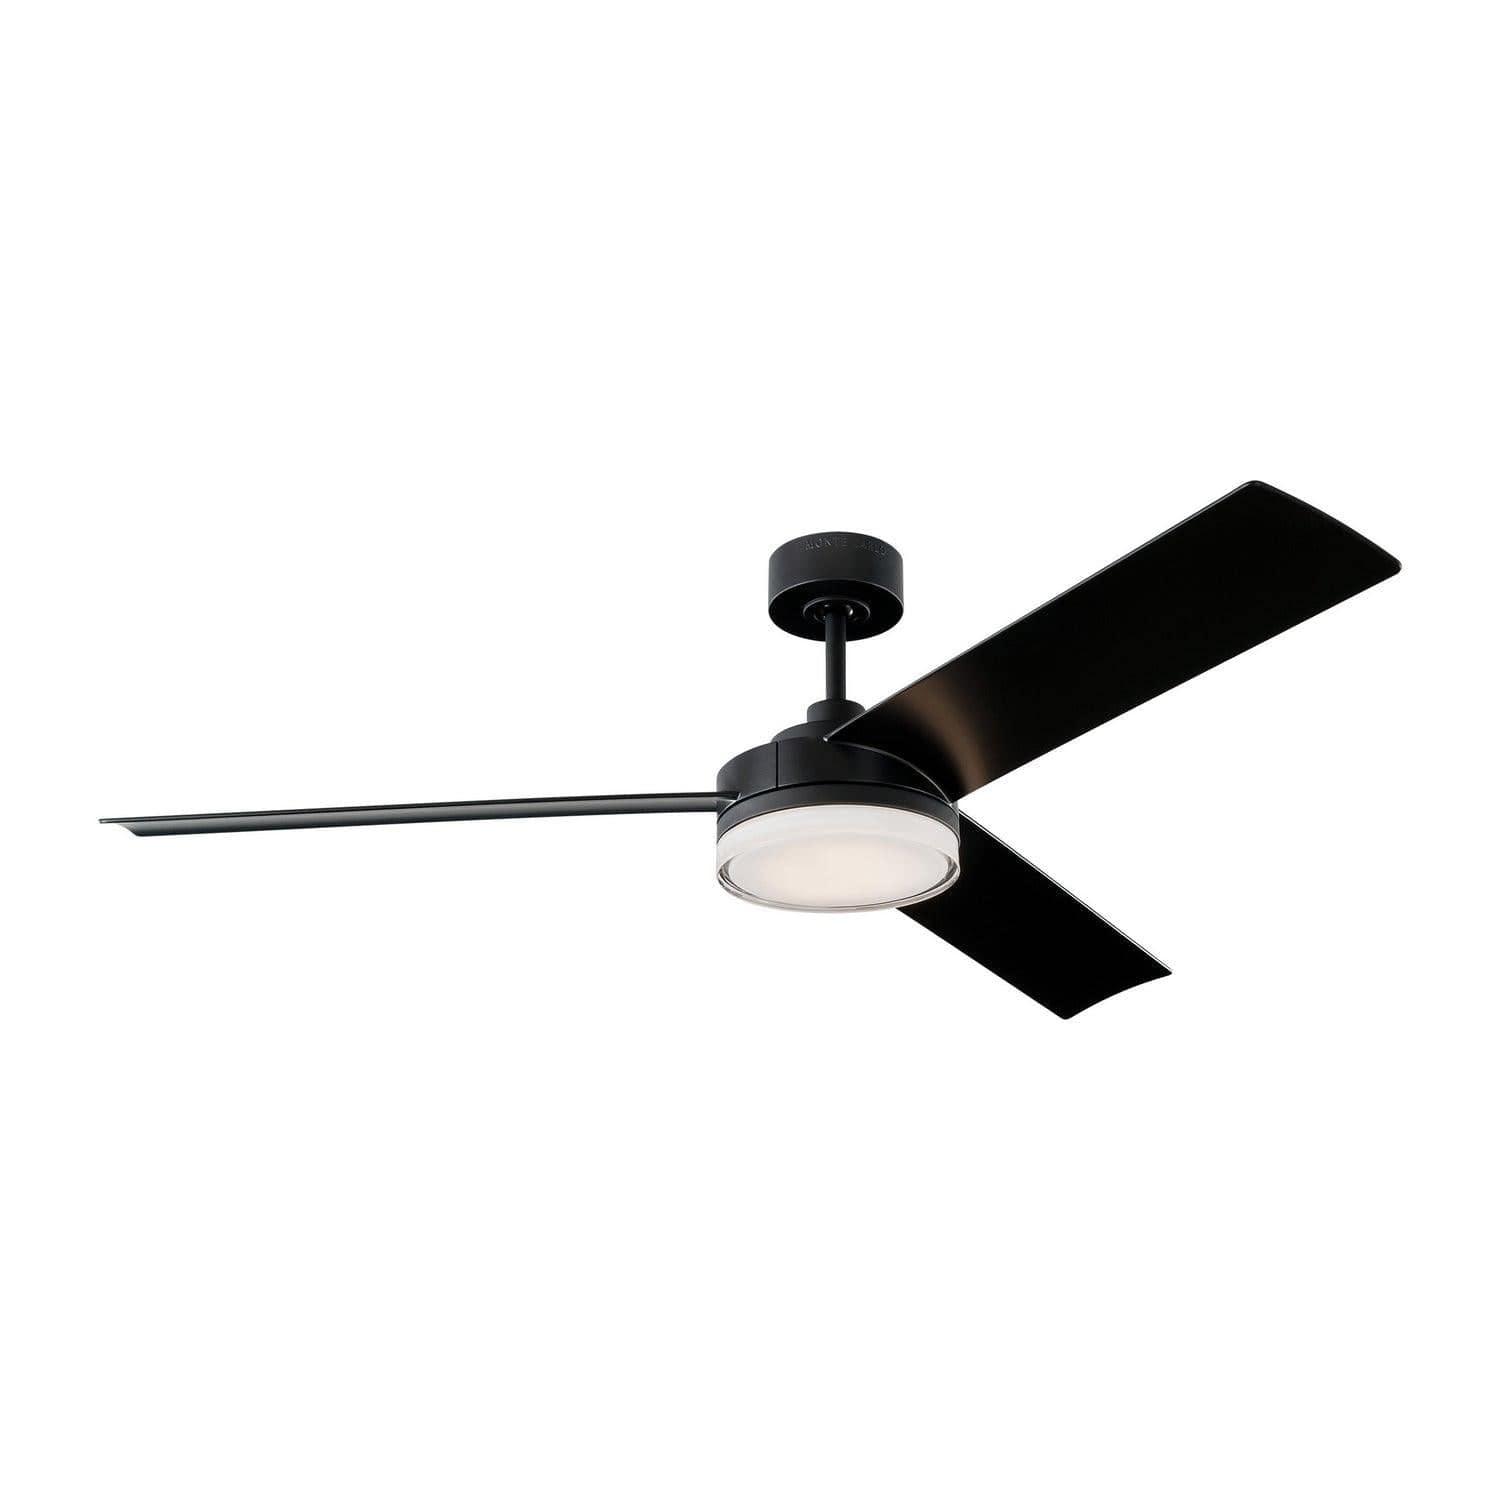 Visual Comfort Fan Collection - Cirque 56" Ceiling Fan - 3CQR56MBKD | Montreal Lighting & Hardware